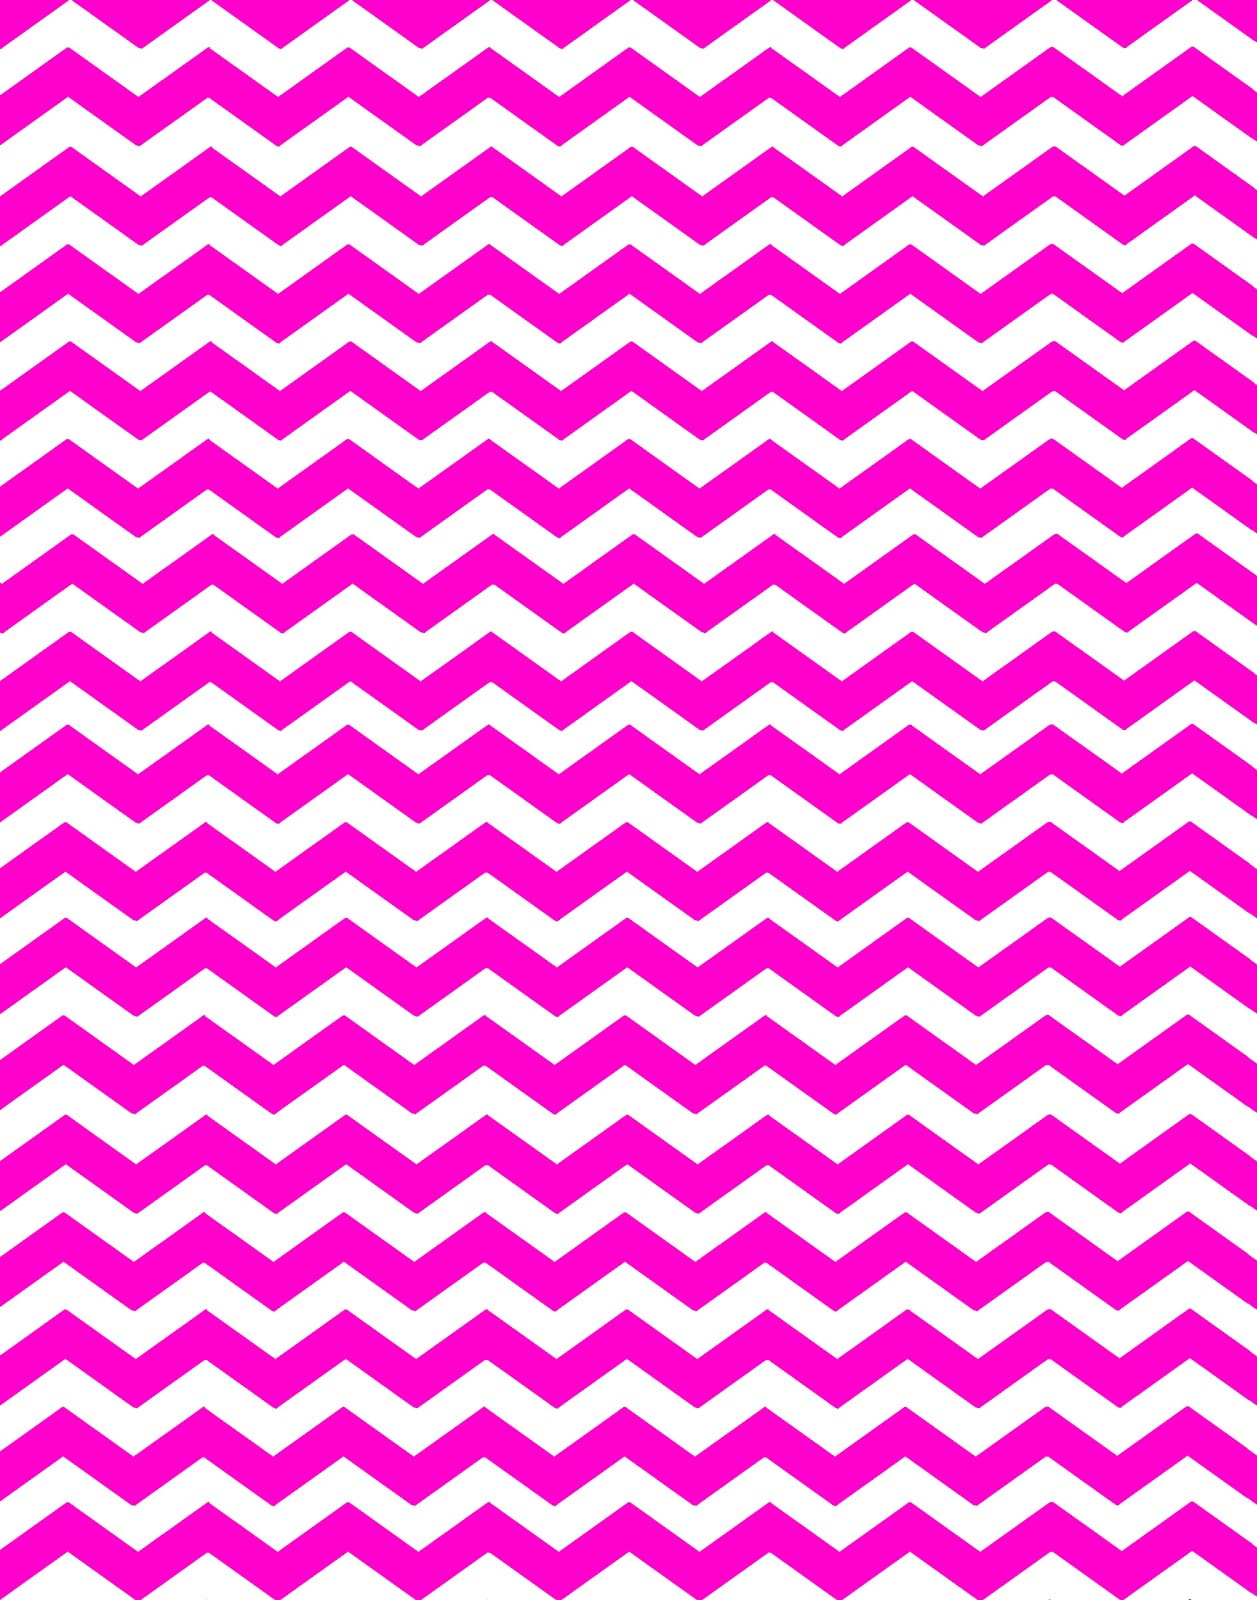 16 New Colors Chevron background patterns 1257x1600